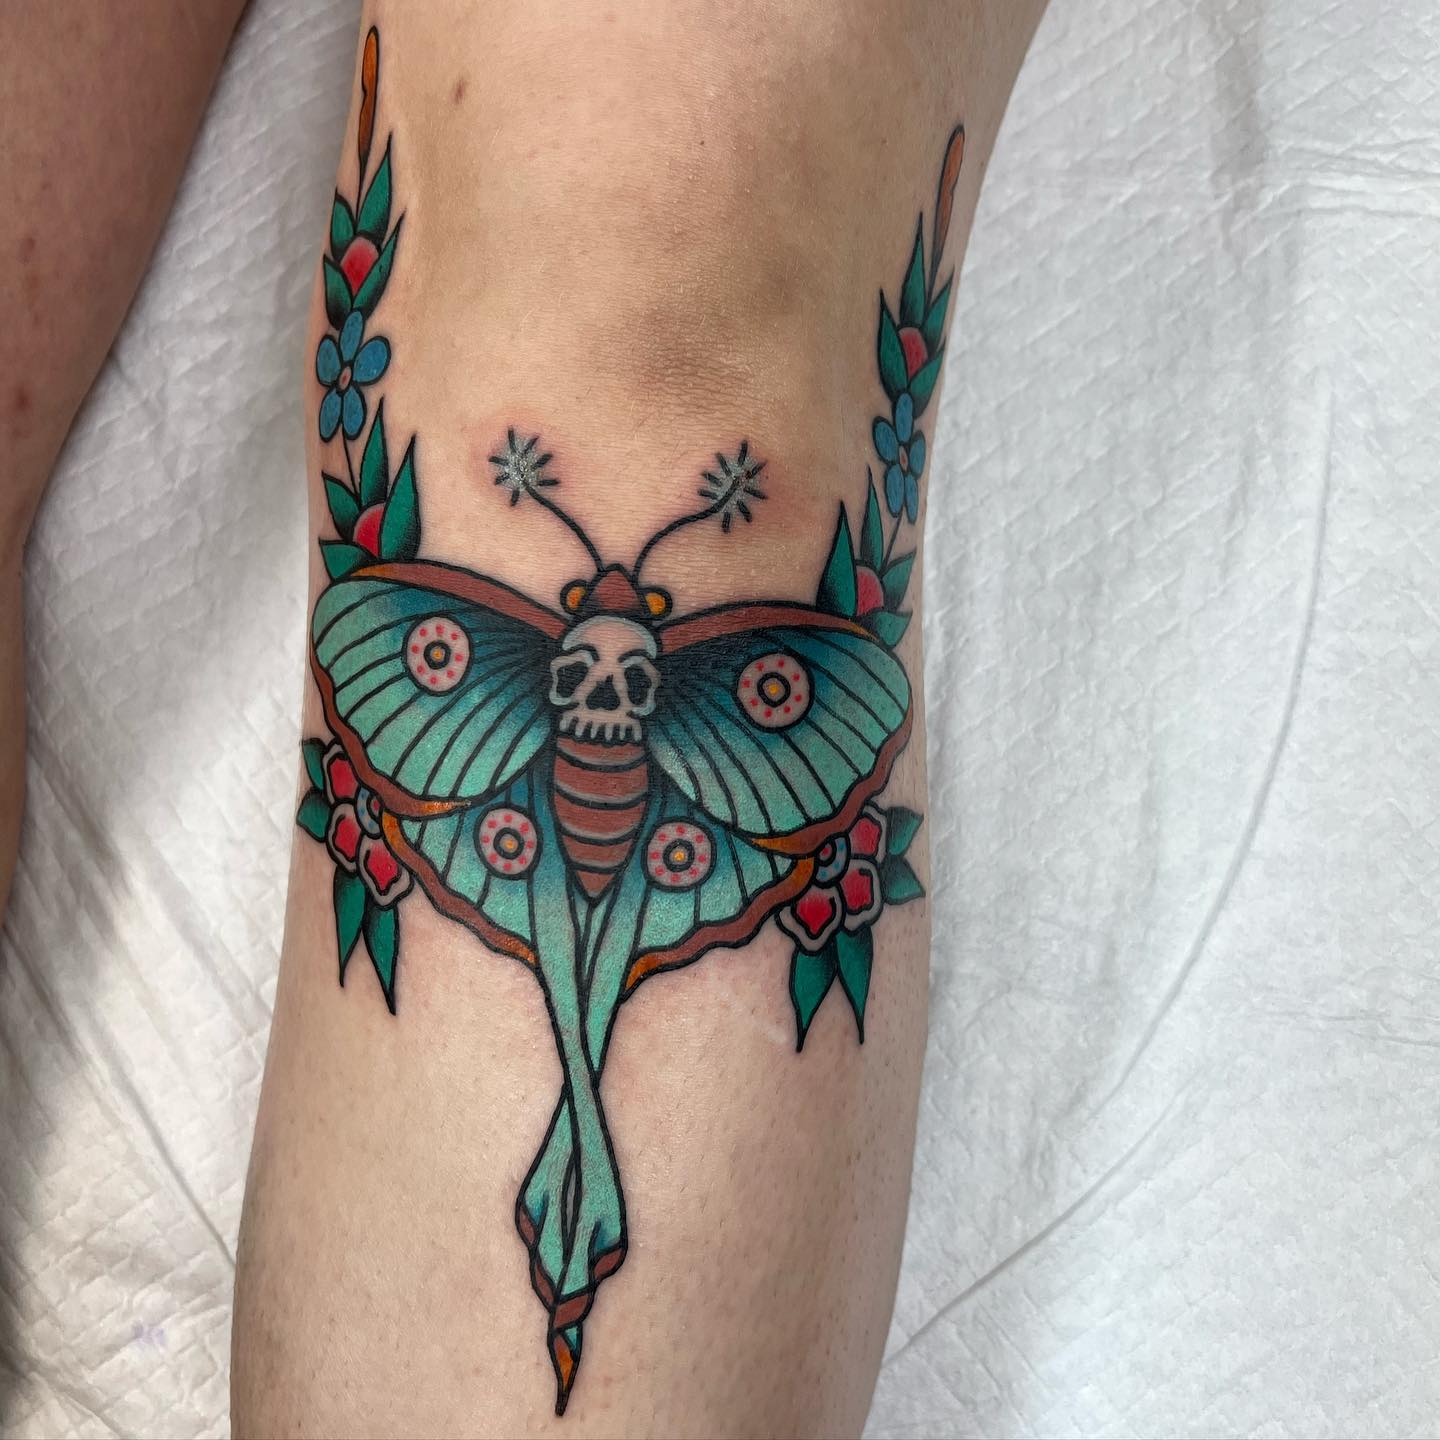 This moth design will symbolize your new beginnings, as well as your flowy personality. If you’re a bold person and someone who likes to have fun in his or her own way, this design will suit you.